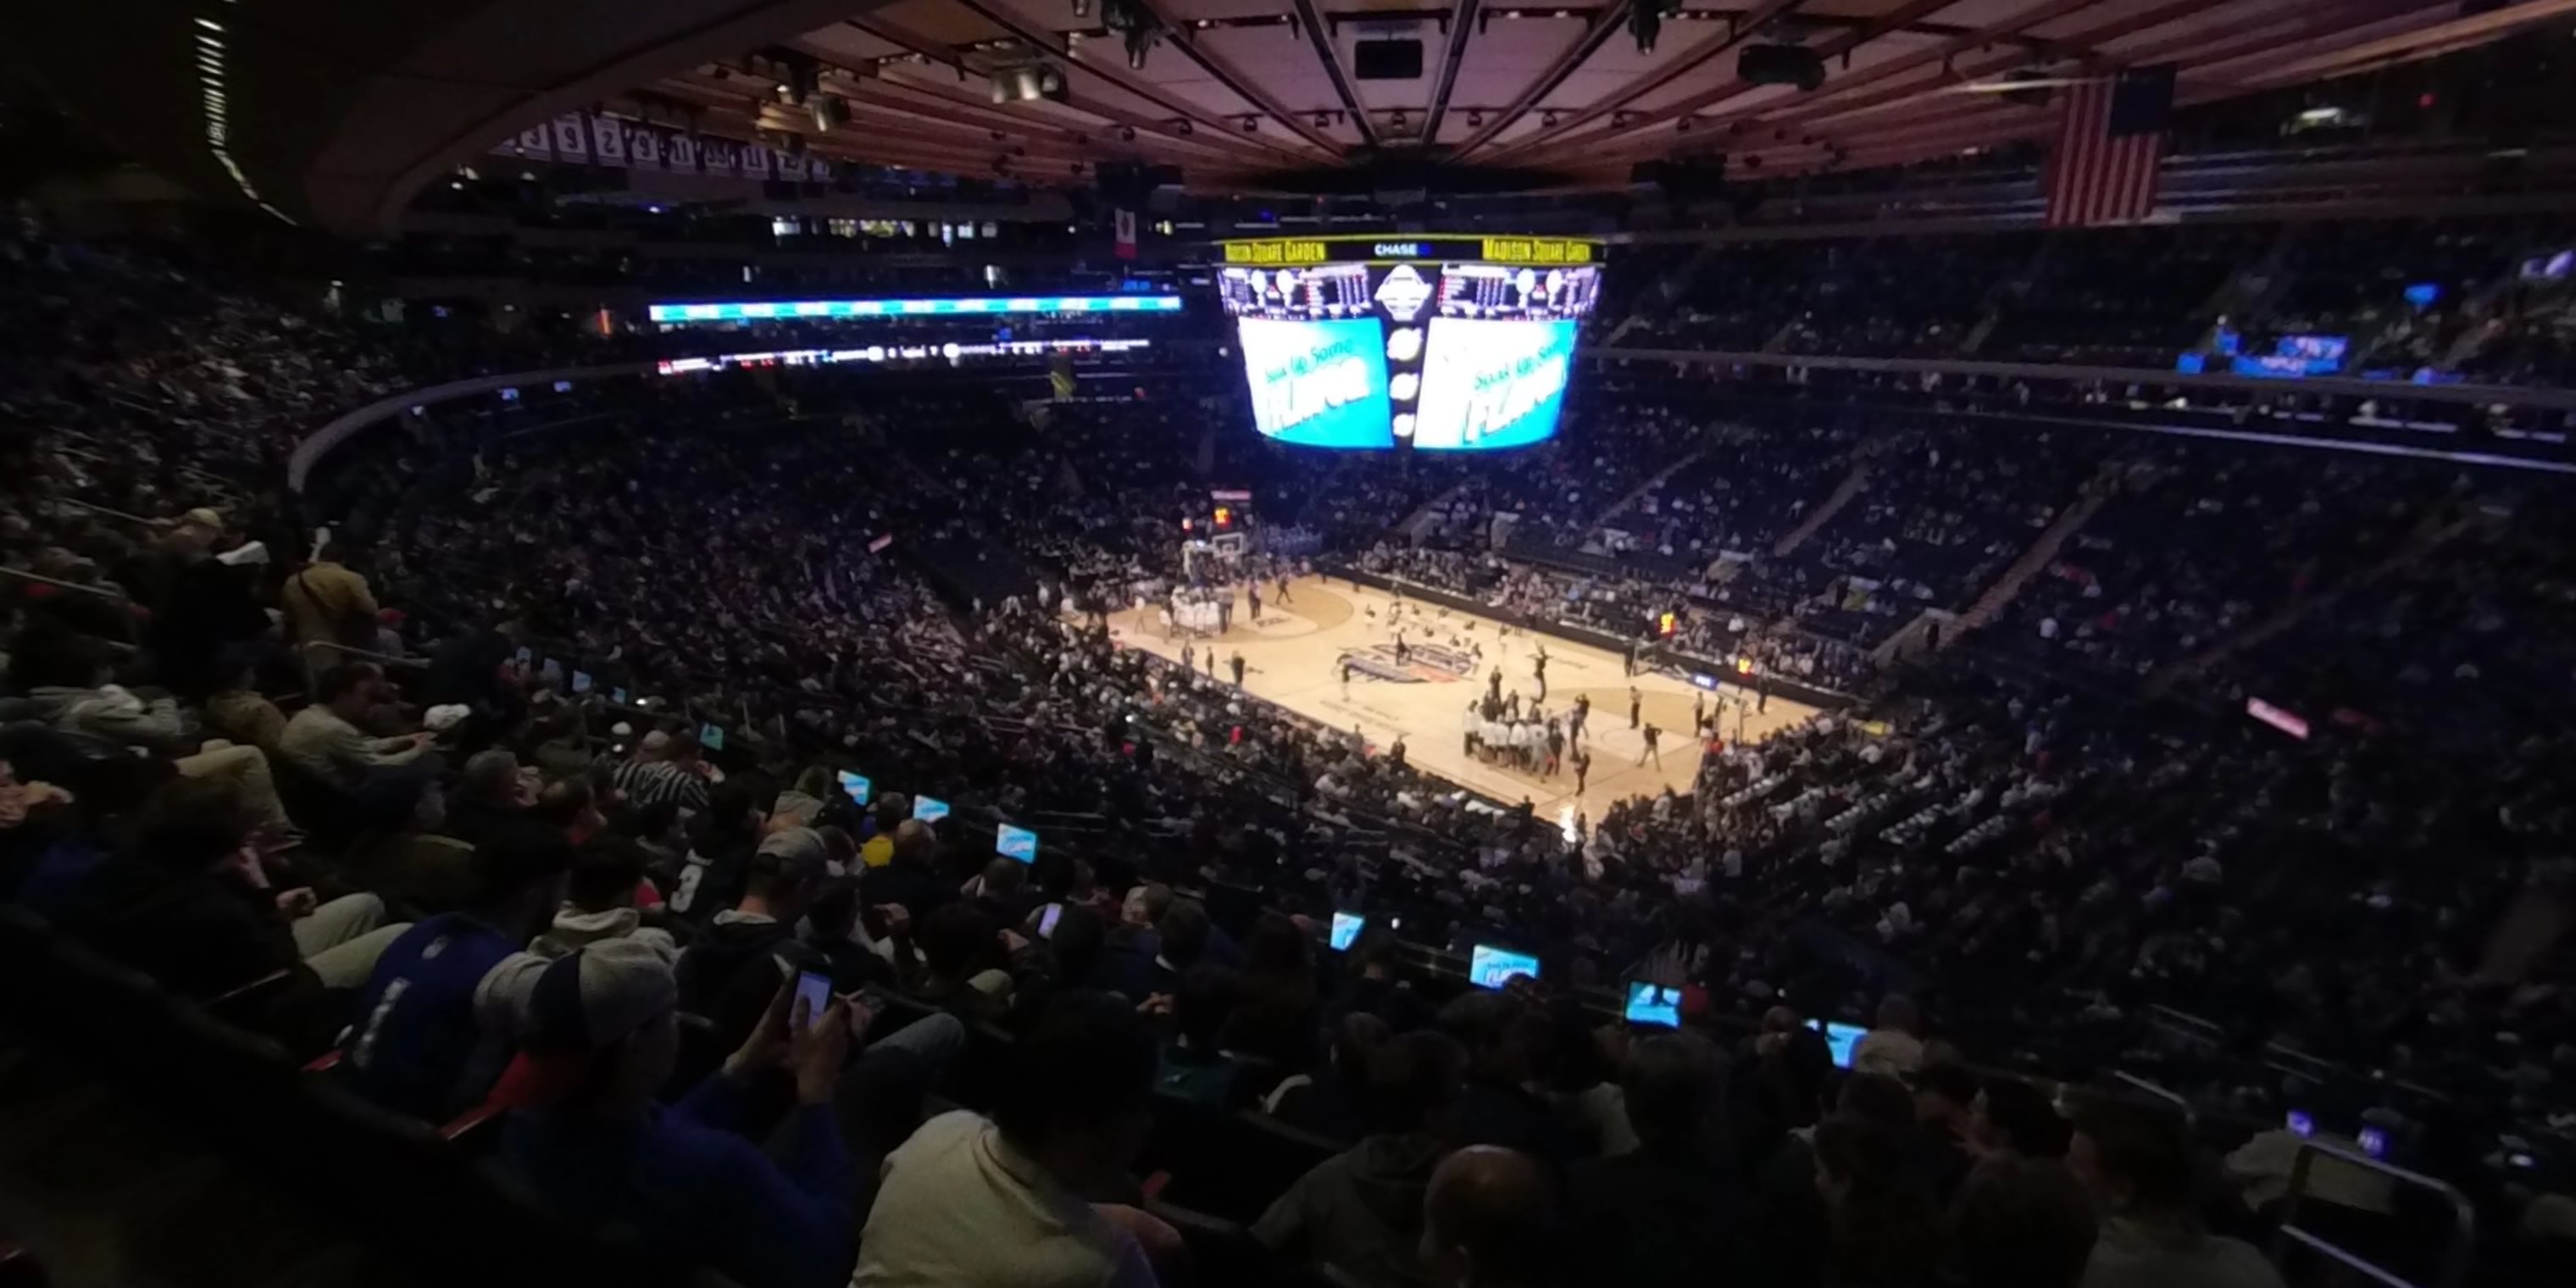 section 214 panoramic seat view  for basketball - madison square garden